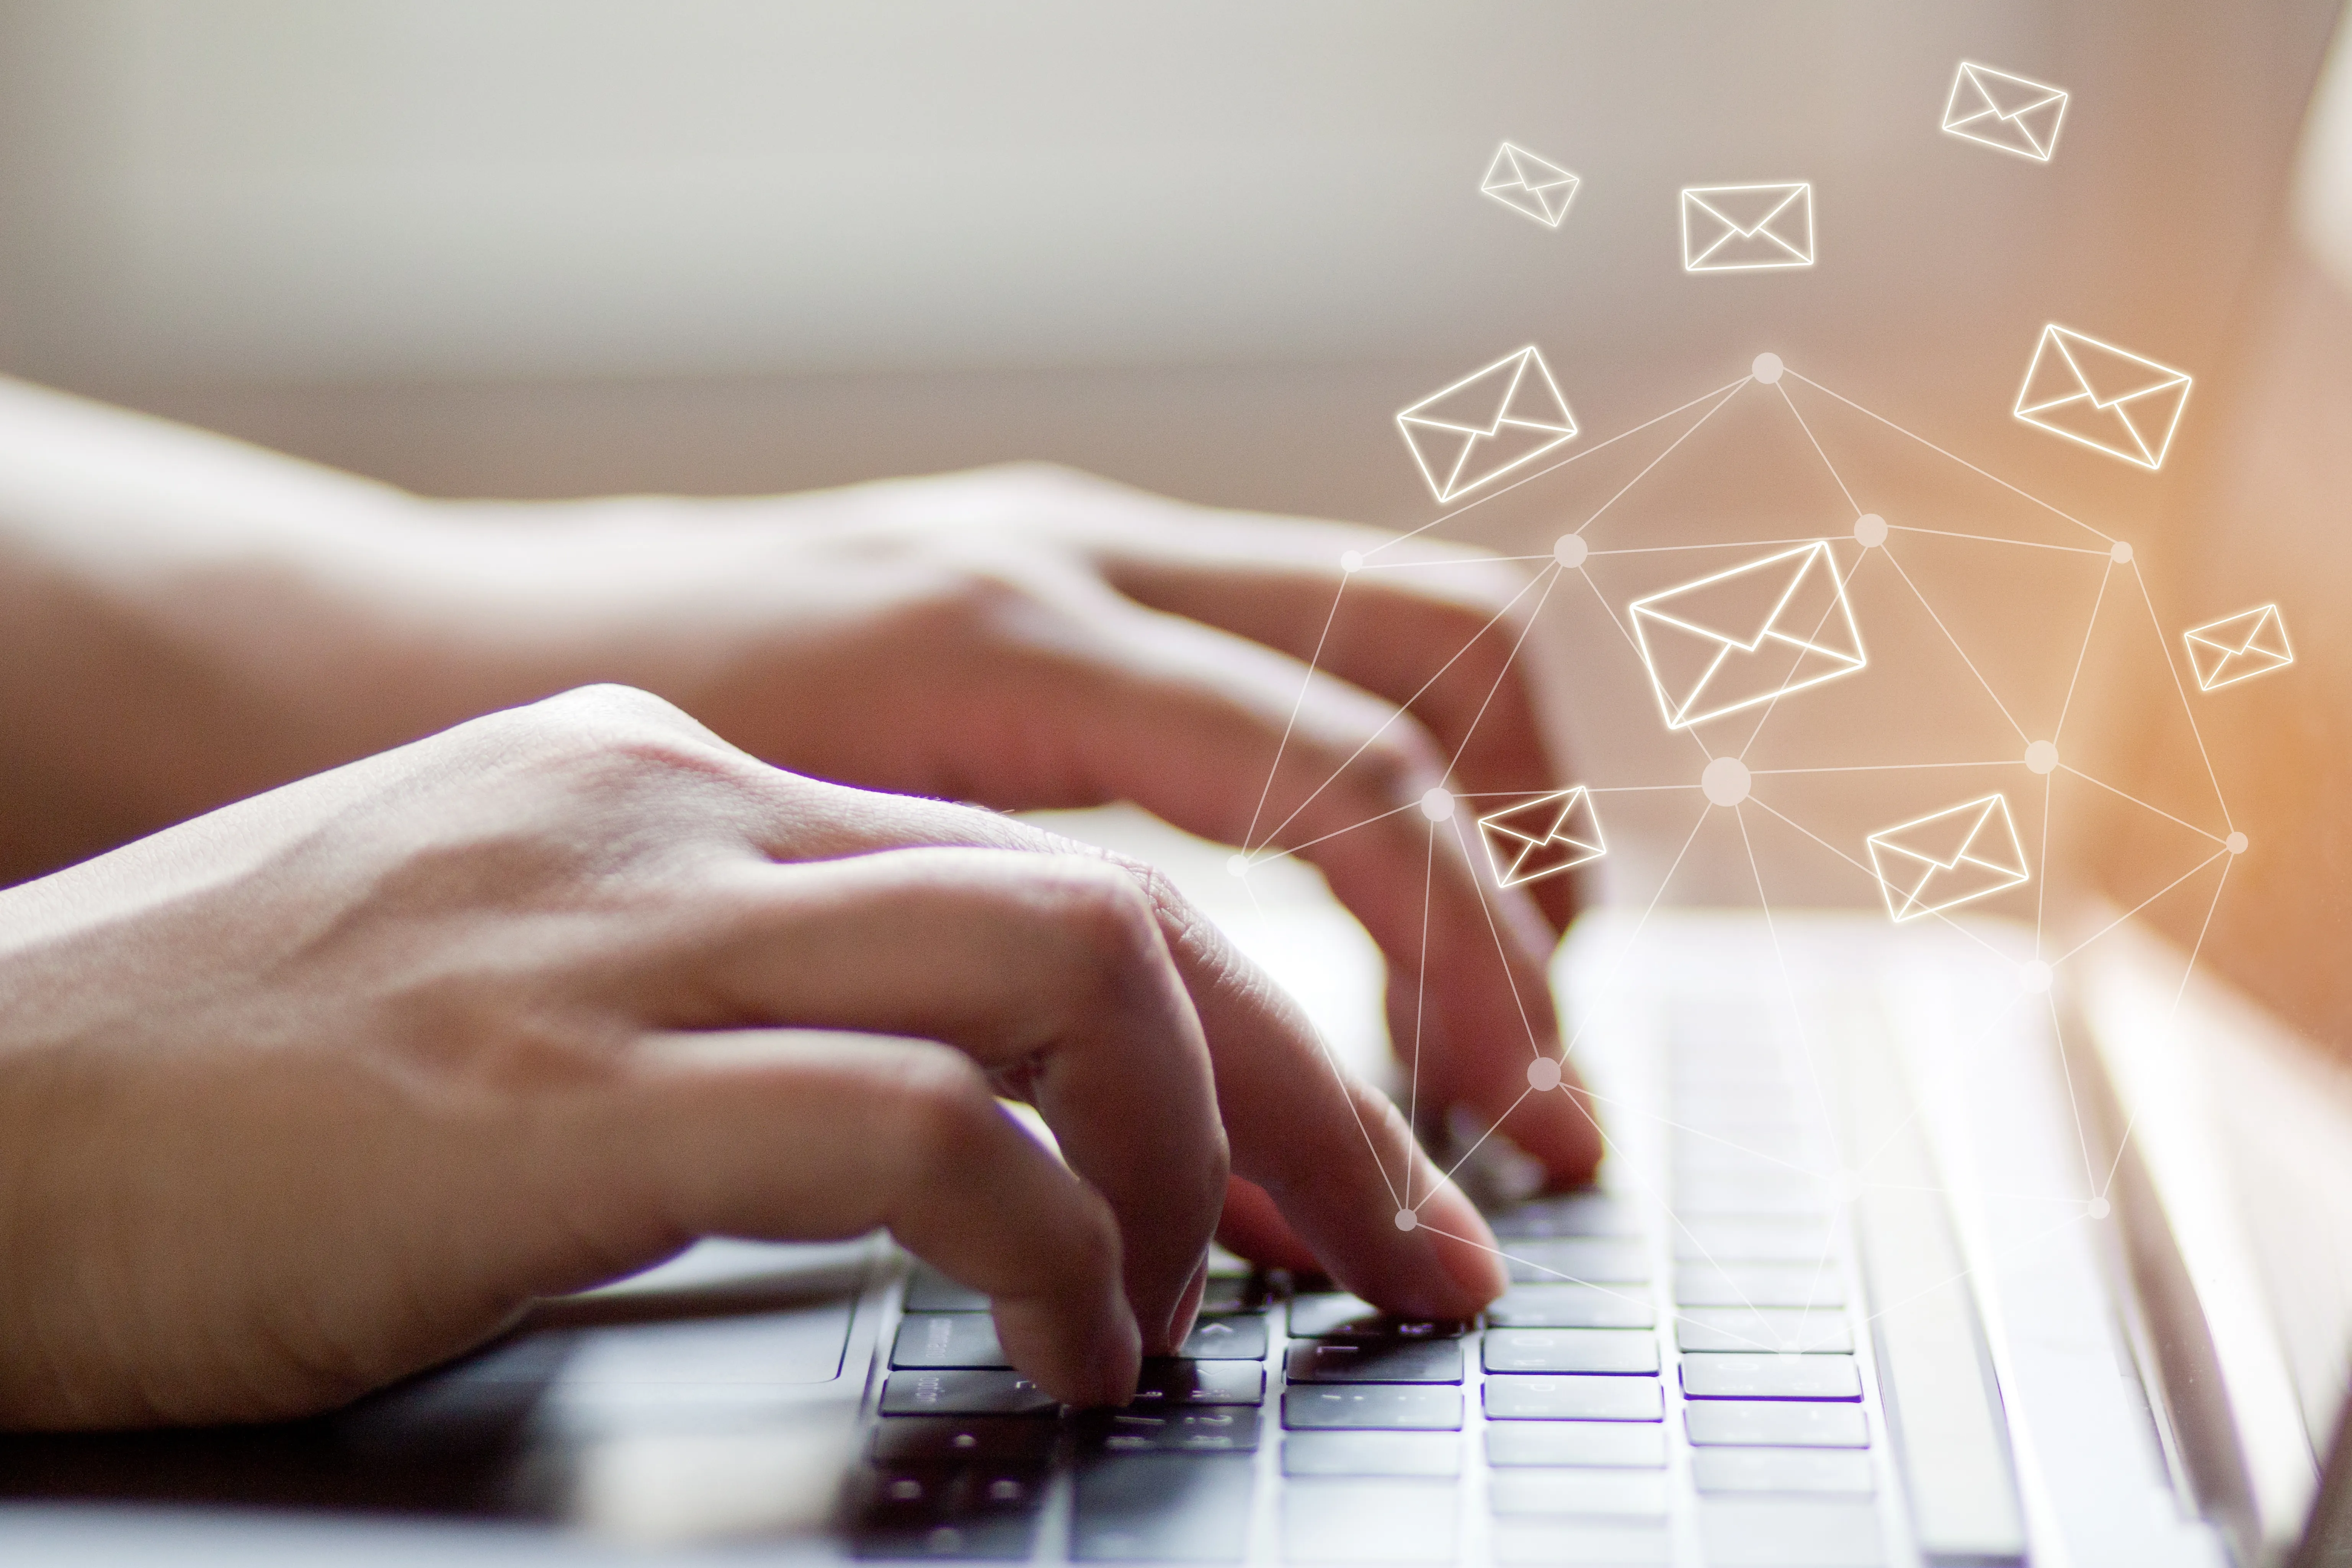 How To Track an Email: The Best Tools of 2022